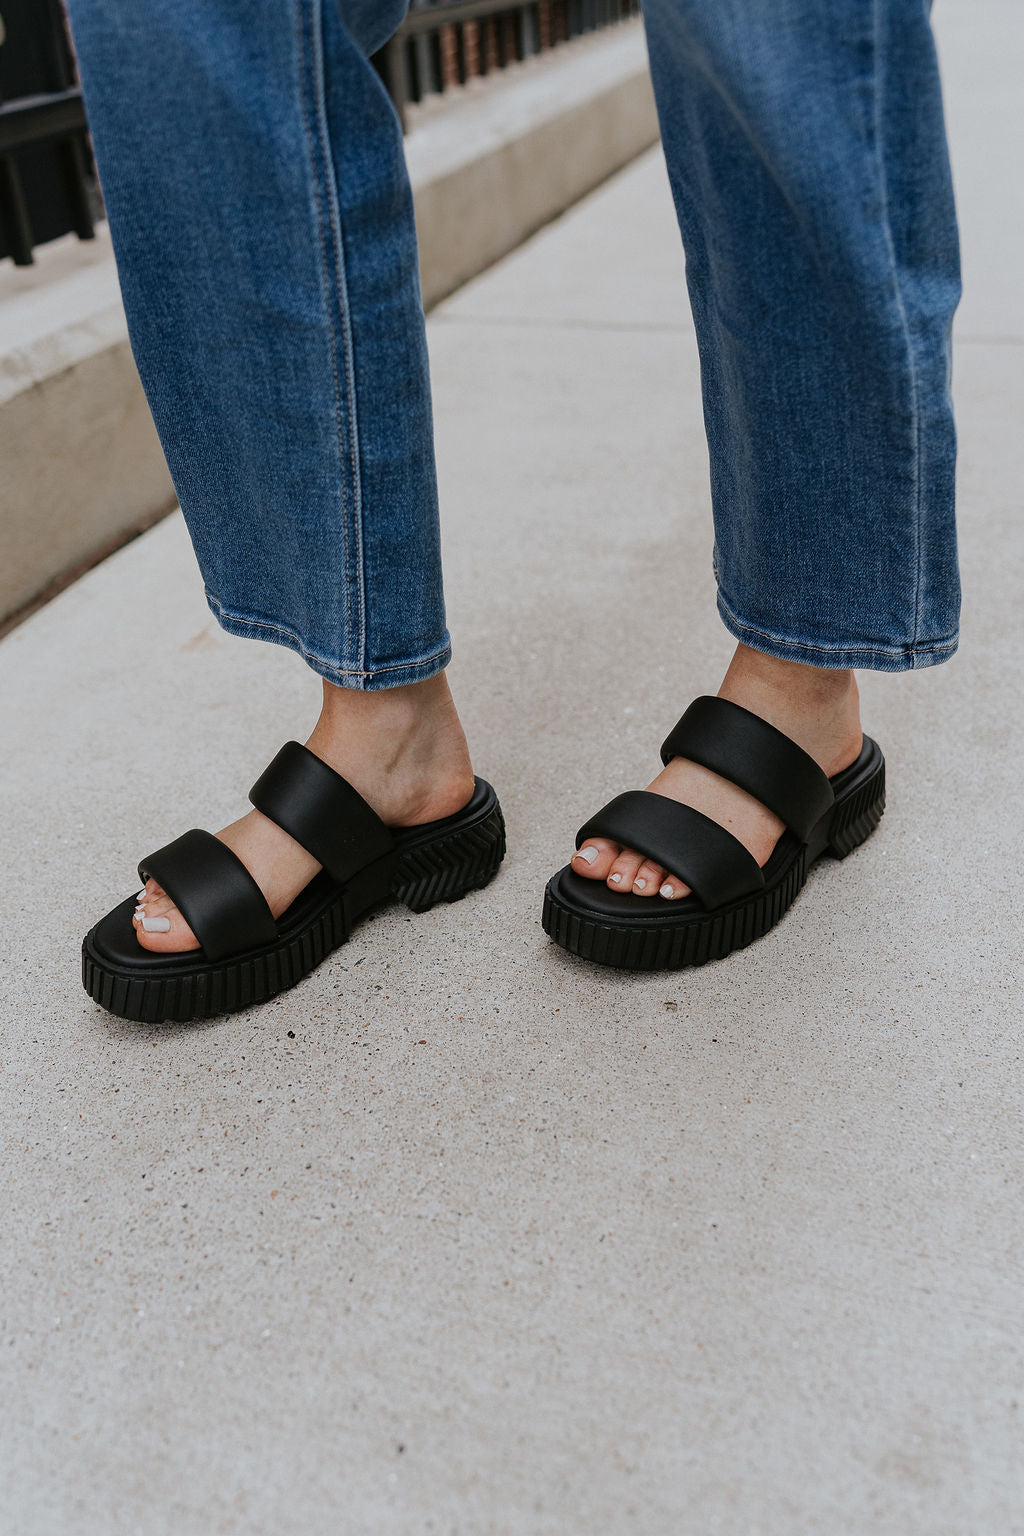 Side view of female model wearing the ONA Streetworks Slide Flat Sandal in Black & Chalk which features Black Light Foam Leather Upper, Two Straps,  Slide-On Style, High-Traction Rubber Platform Sole and 2" Heel Height, 1 1/2" Platform Height 